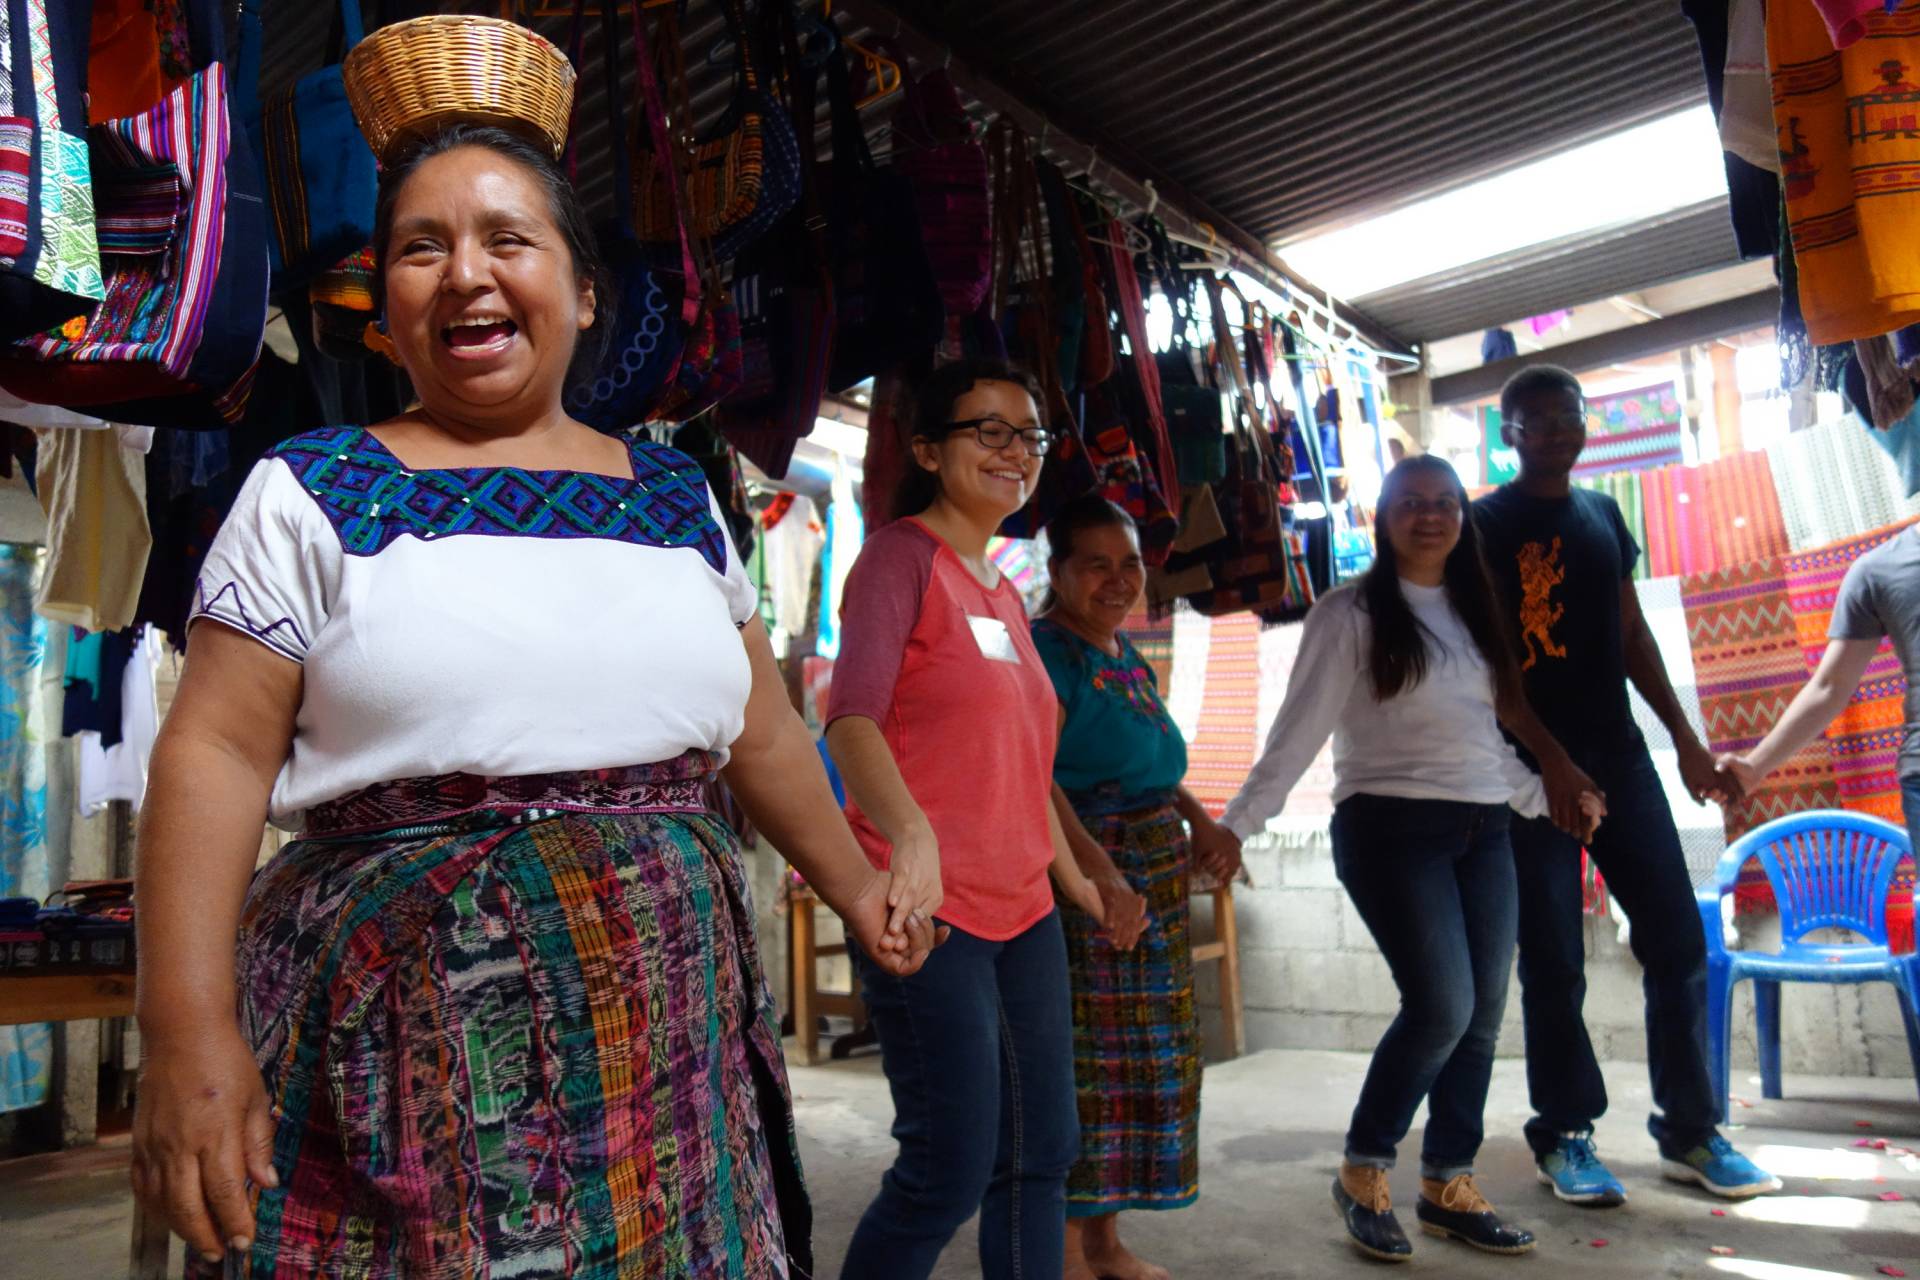 A Guatemalan woman leads a group of students in a dance